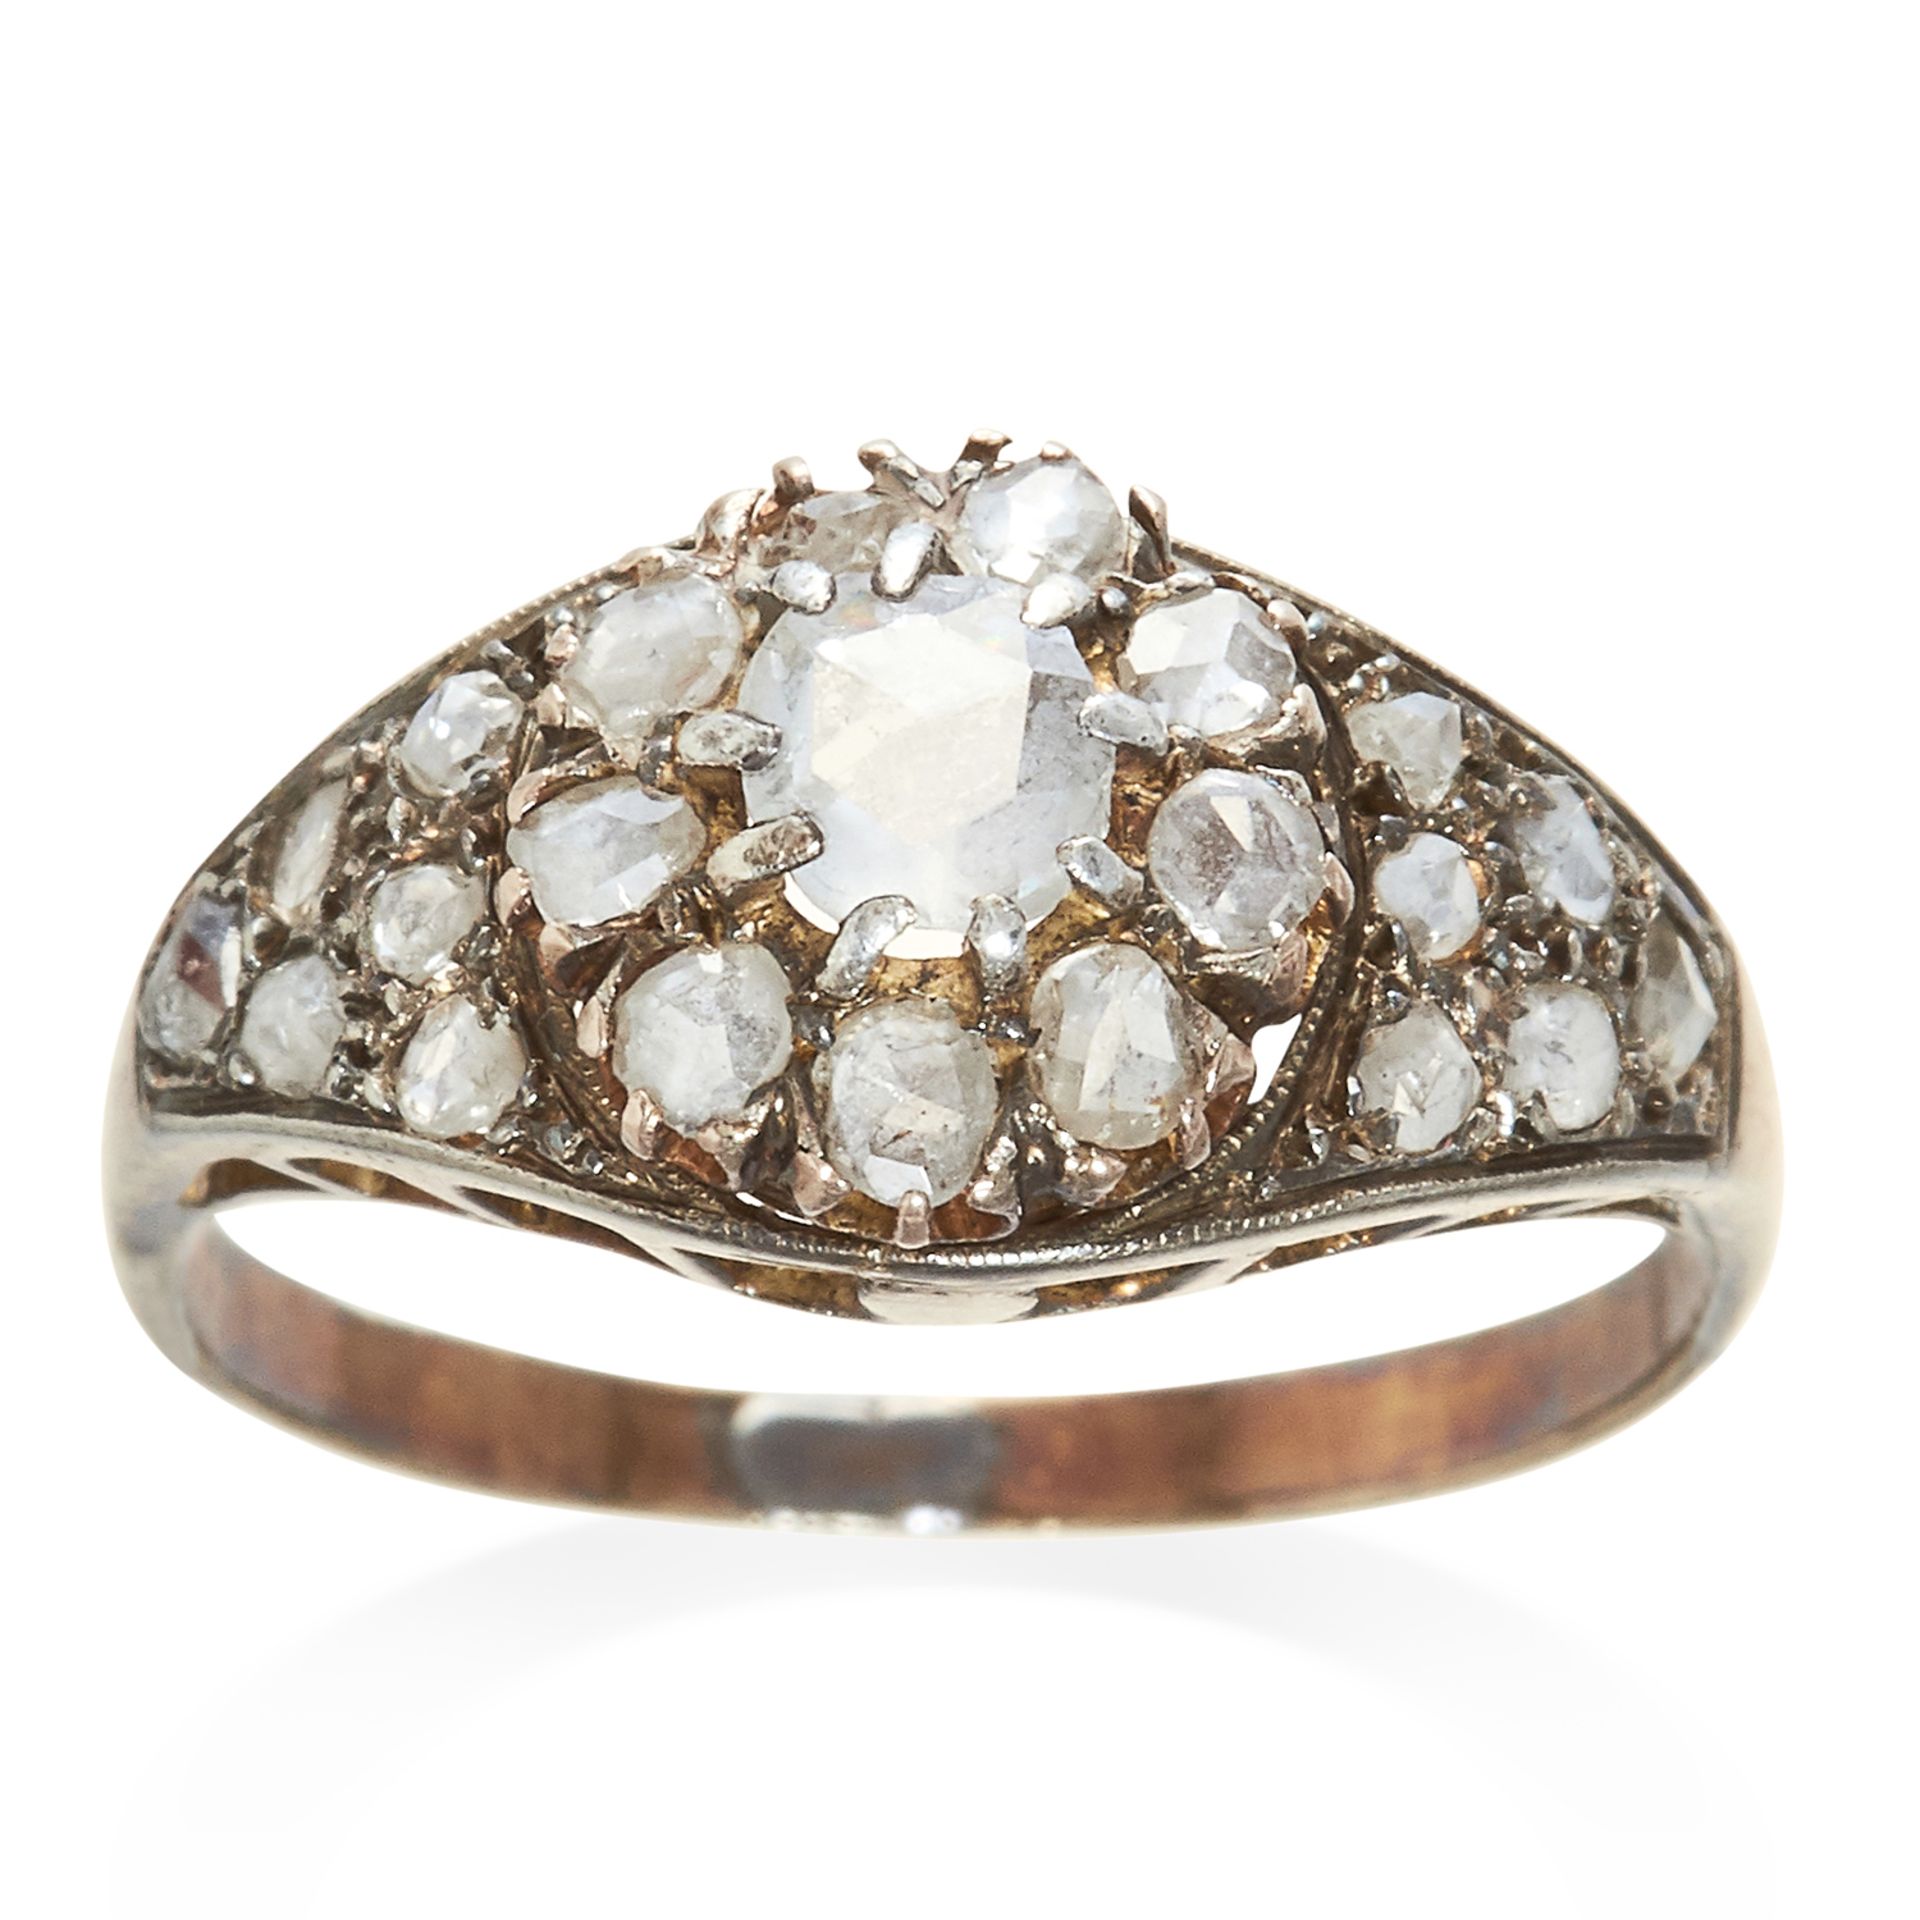 AN ANTIQUE DIAMOND CLUSTER RING in yellow gold, set with rose cut diamonds, unmarked, size N / 7,